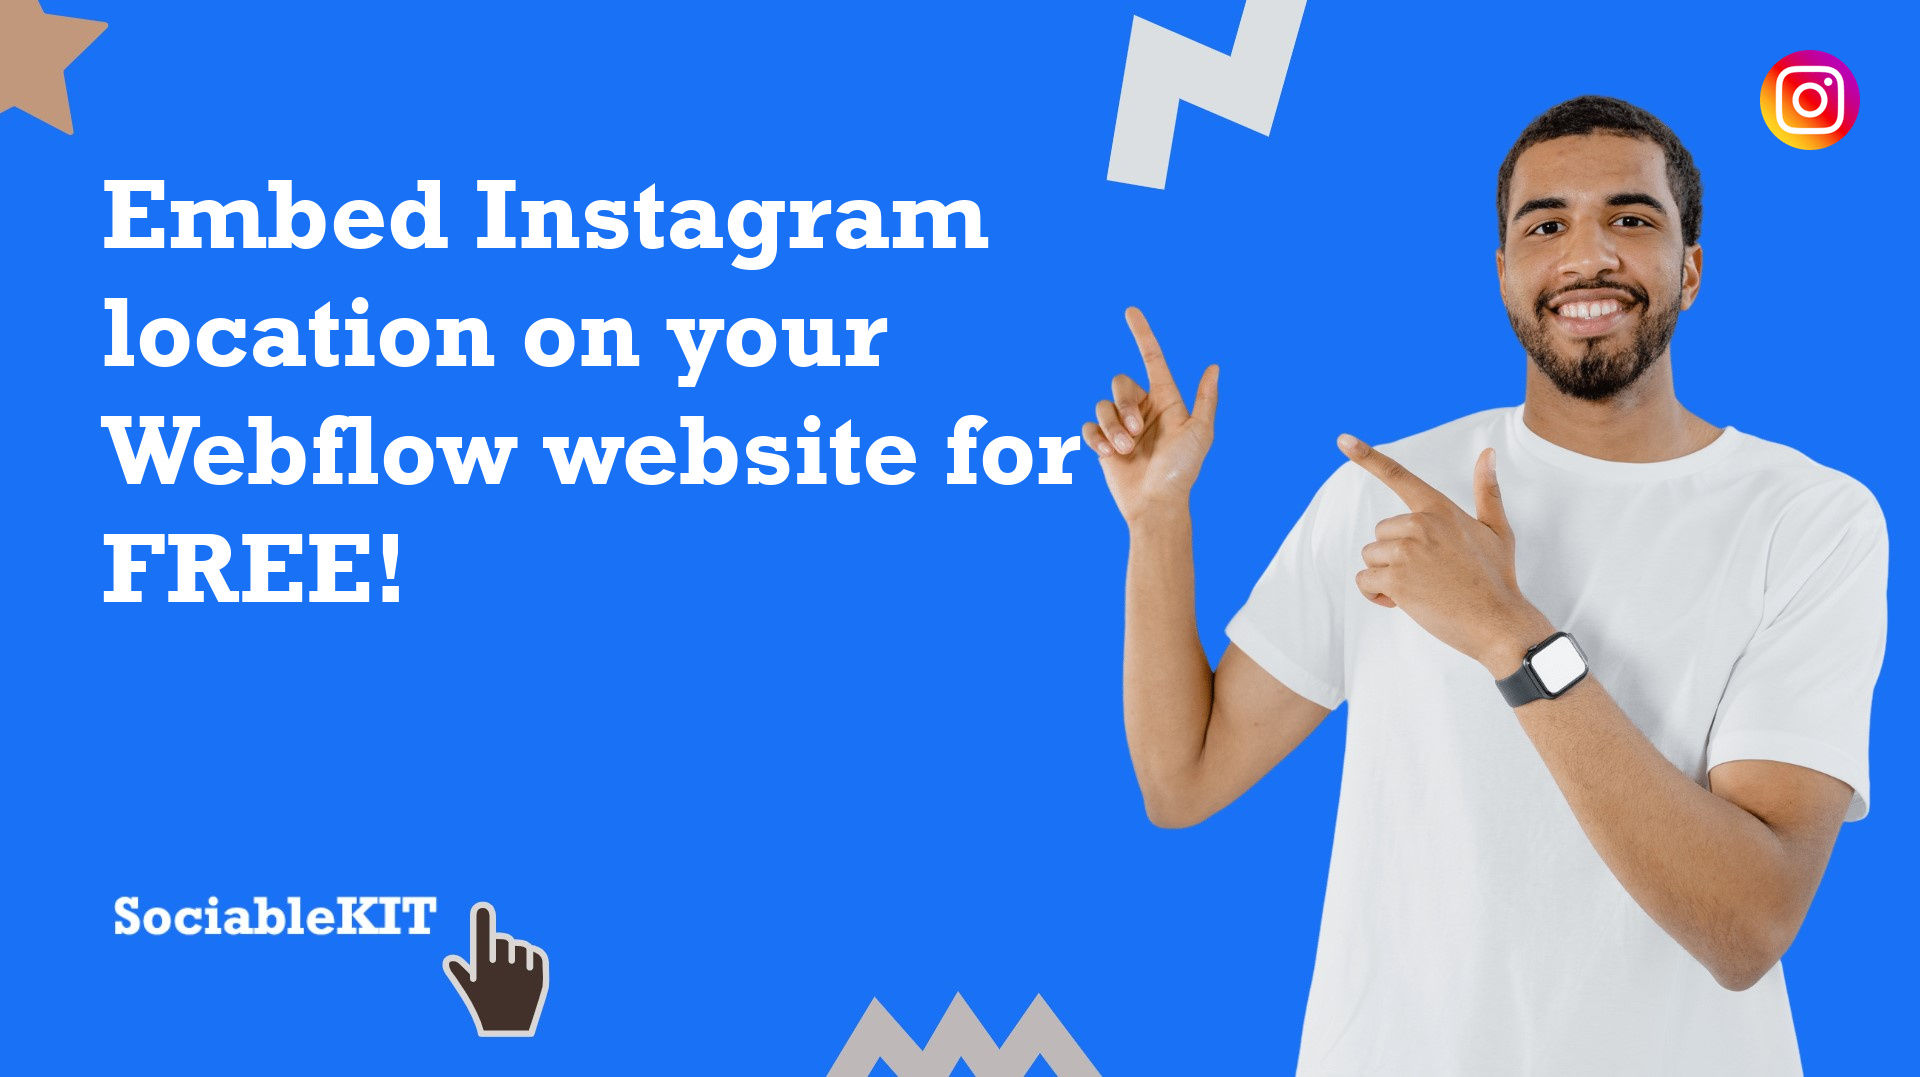 How to embed Instagram location on your Webflow website for FREE?